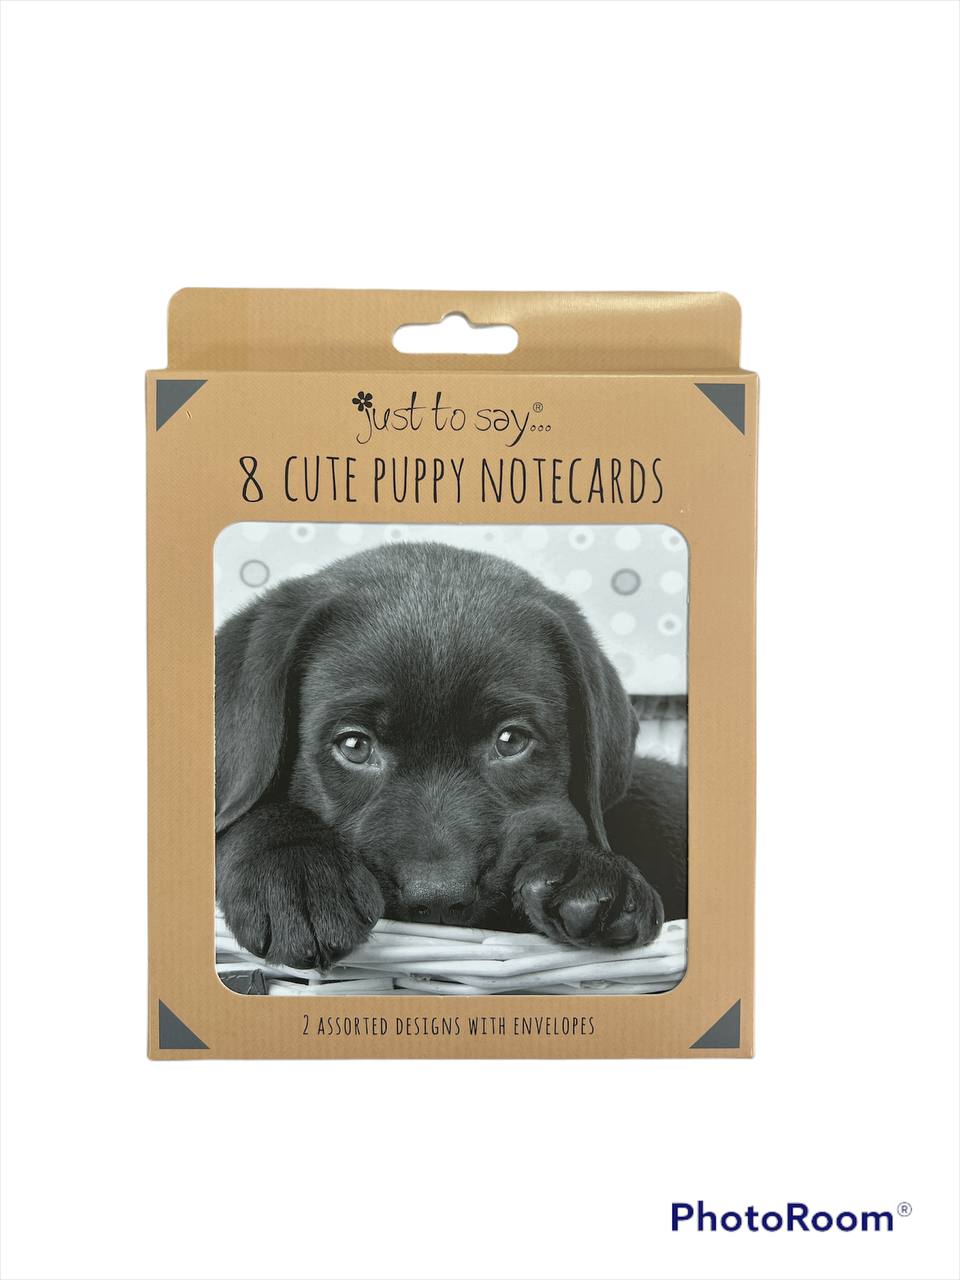 8 Square Notecards: Cute Puppy 2 designs